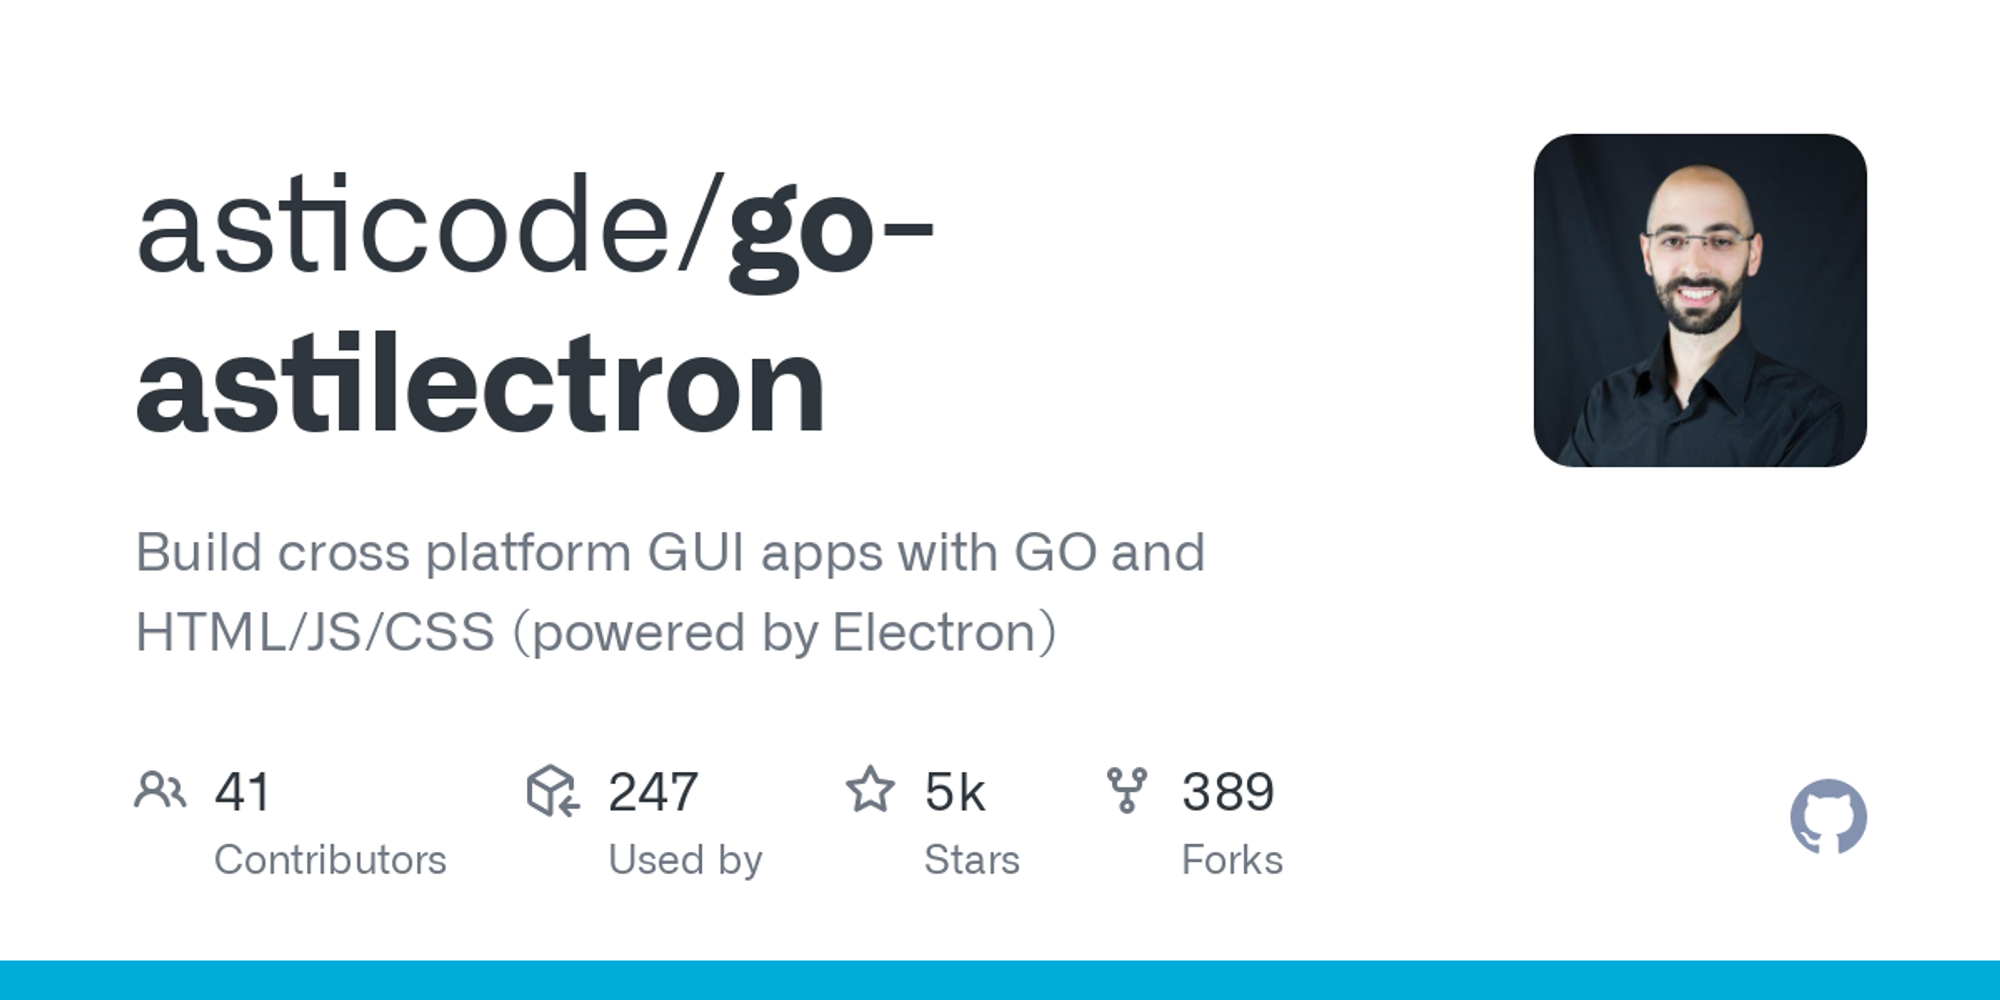 GitHub - asticode/go-astilectron: Build cross platform GUI apps with GO and HTML/JS/CSS (powered by Electron)